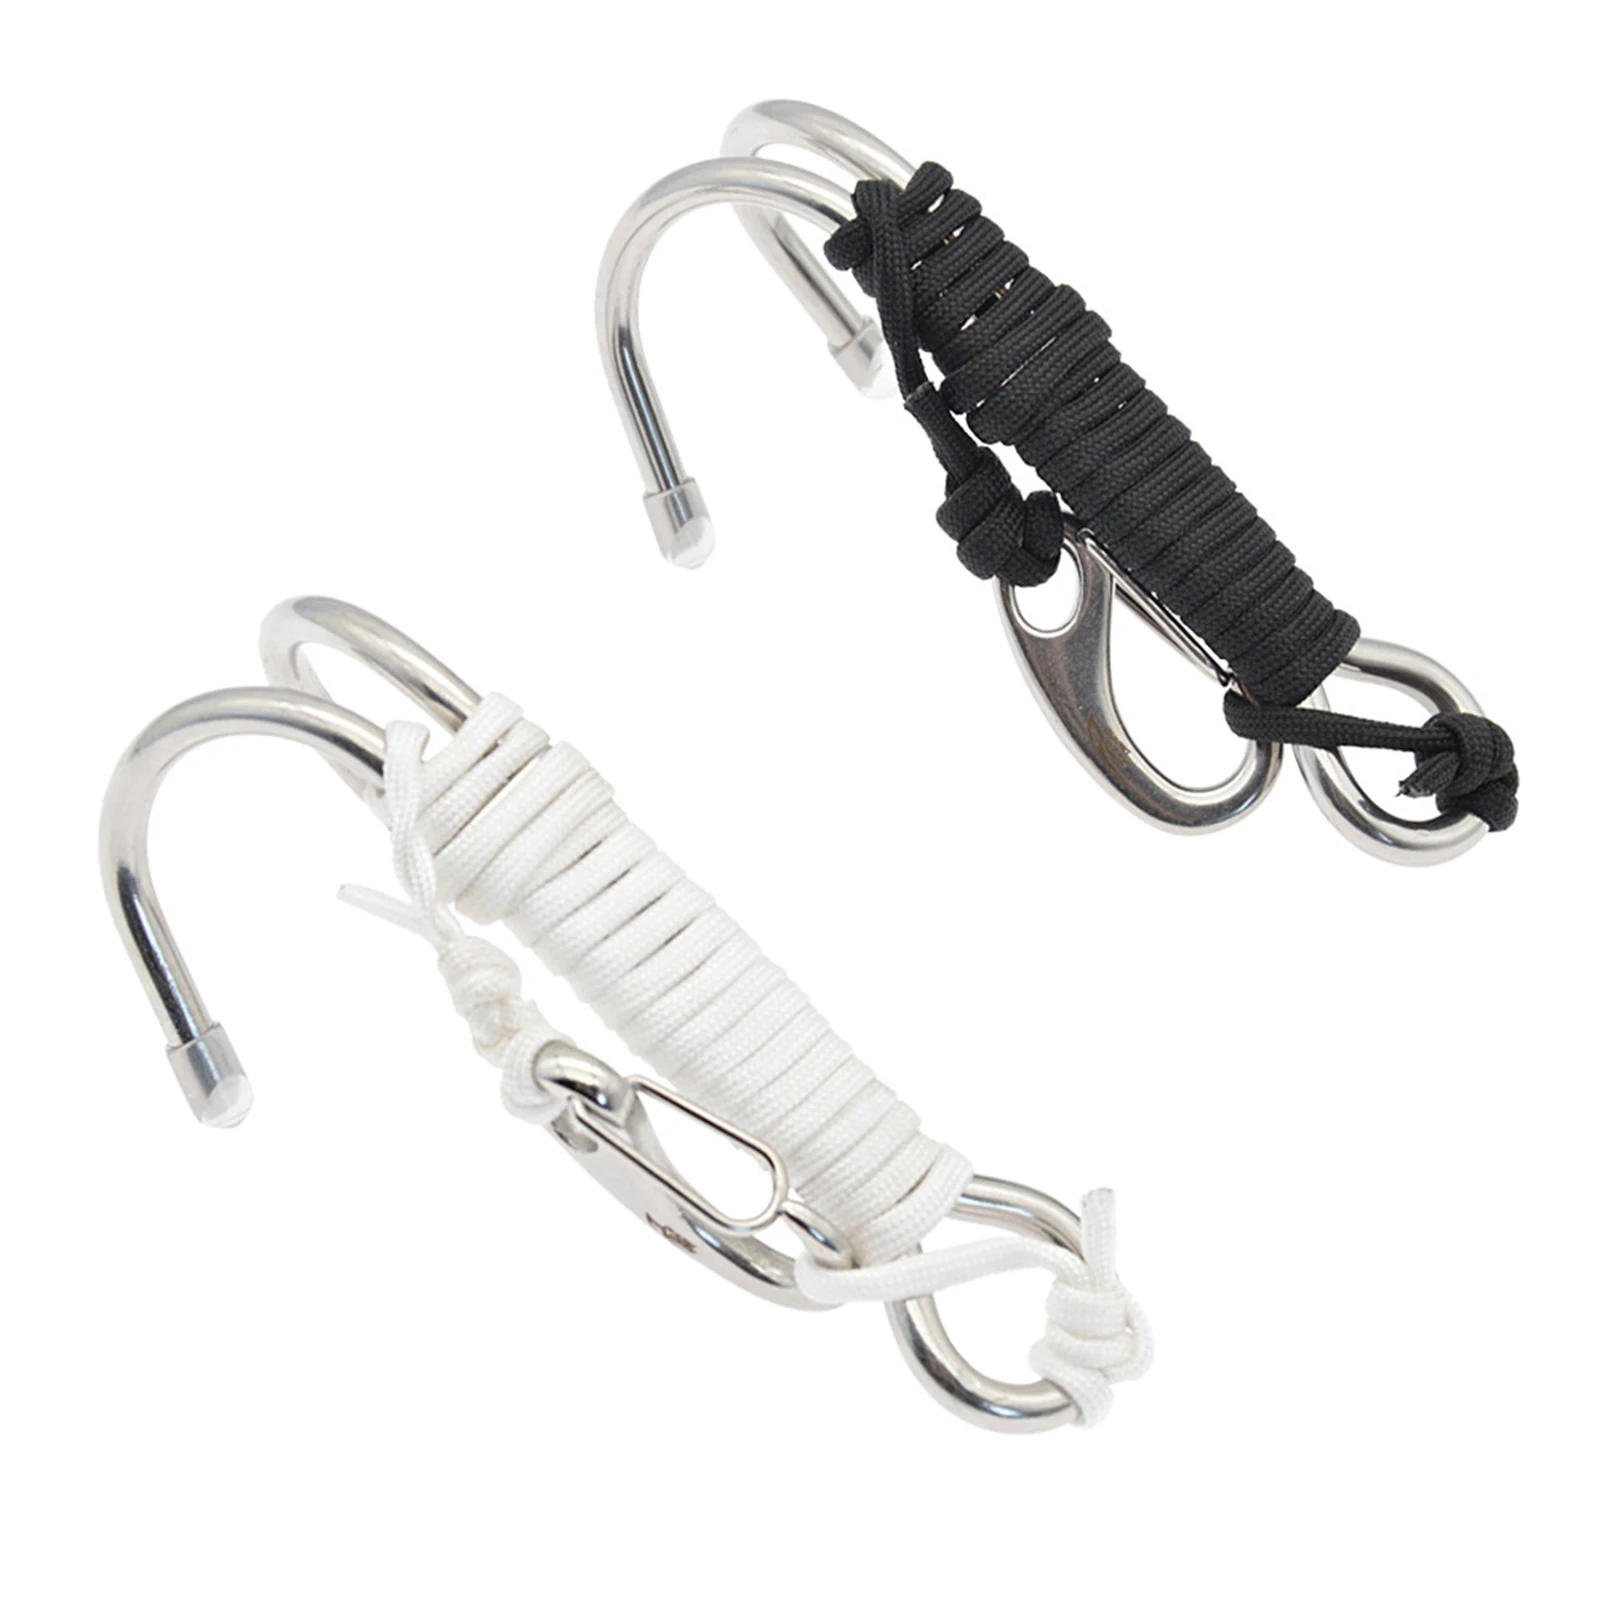 Reef Diver Stainless Steel J-Hook for Protecting Reefs Scuba Diving 